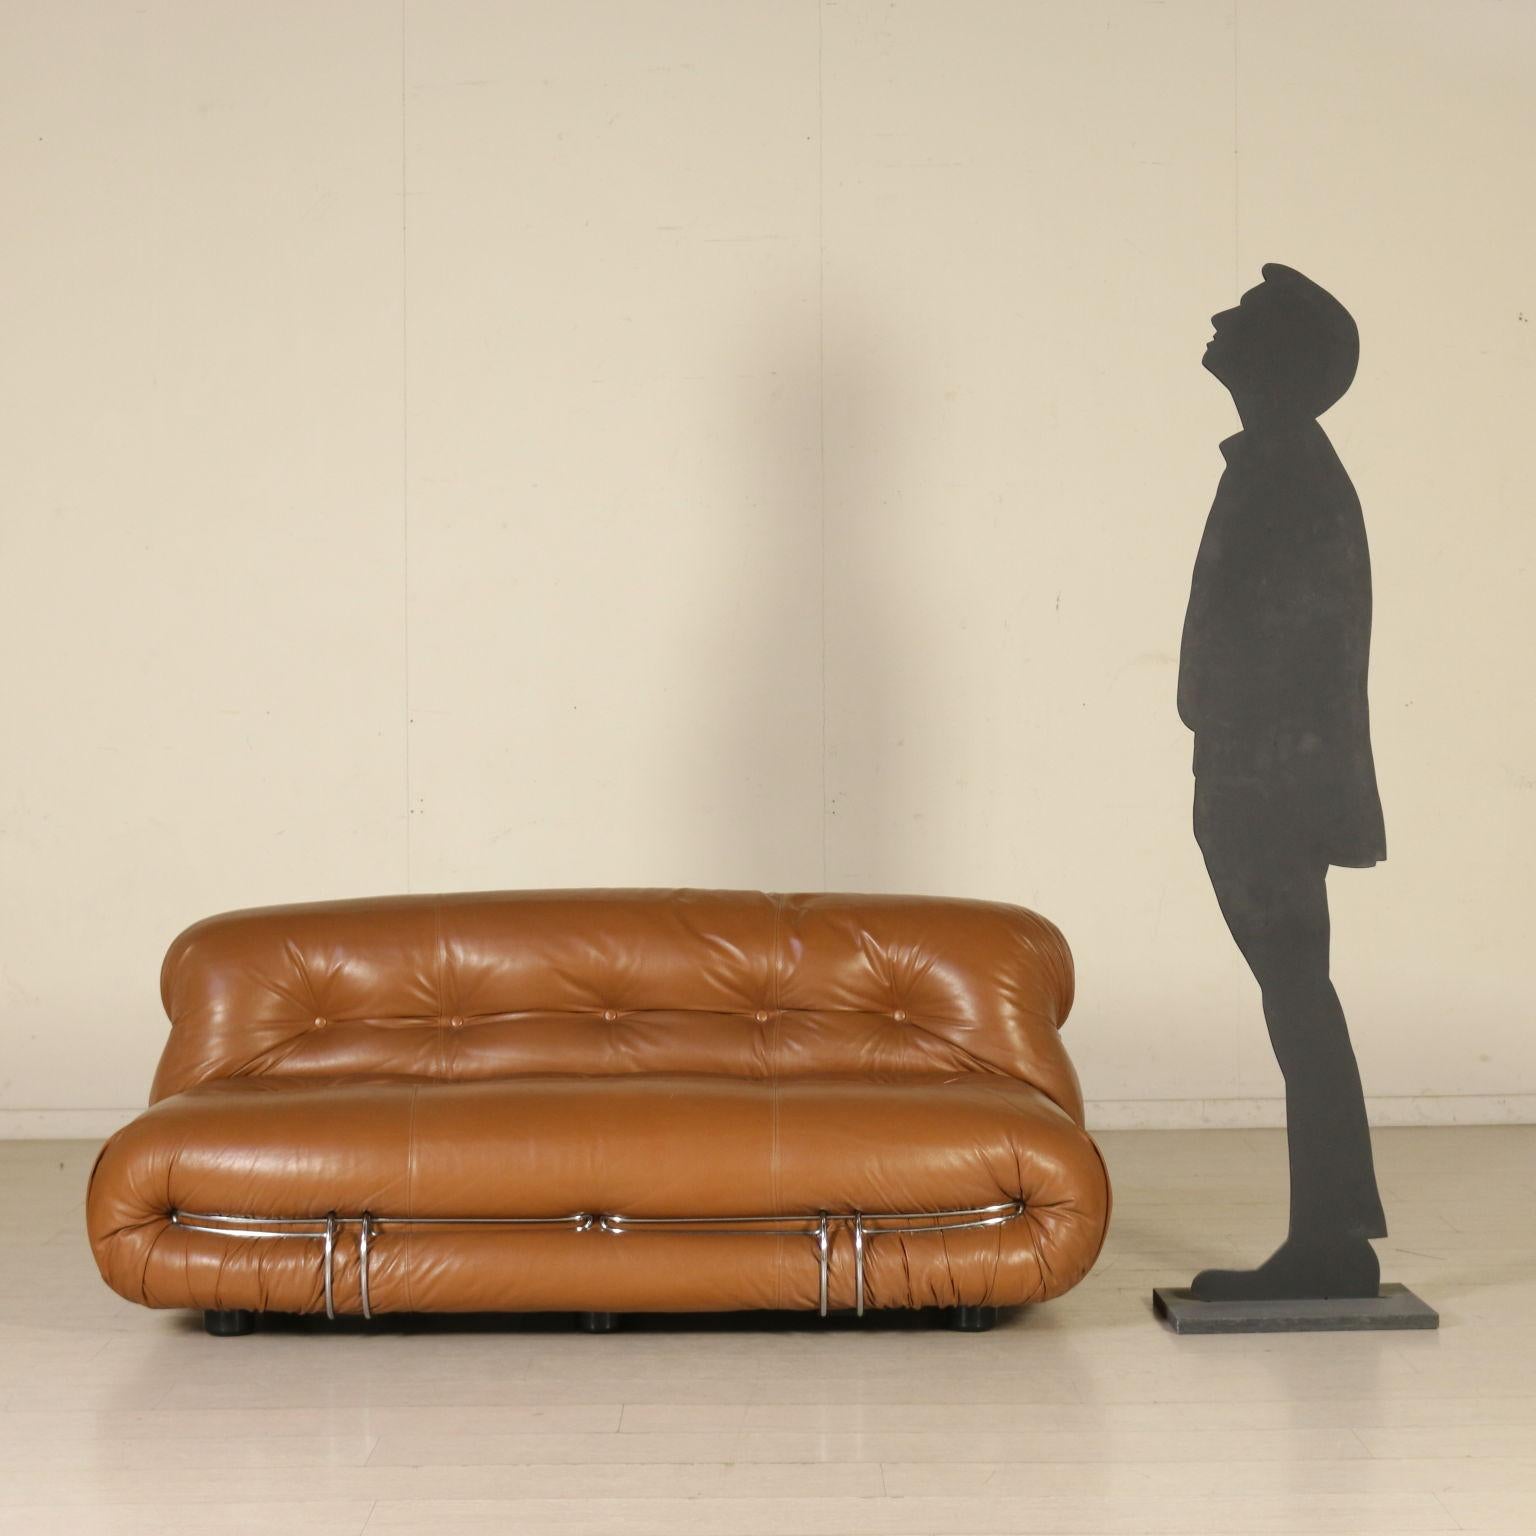 A sofa designed by Afra Bianchin (1937-2011) and Tobia Scarpa, 1935 for Cassina. Foam padding, leather upholstery and chromed metal. Model: Soriana. Manufactured in Italy, 1970s.

Sofa Soriana Leather Chromed Metal Vintage, Italy, 1970s